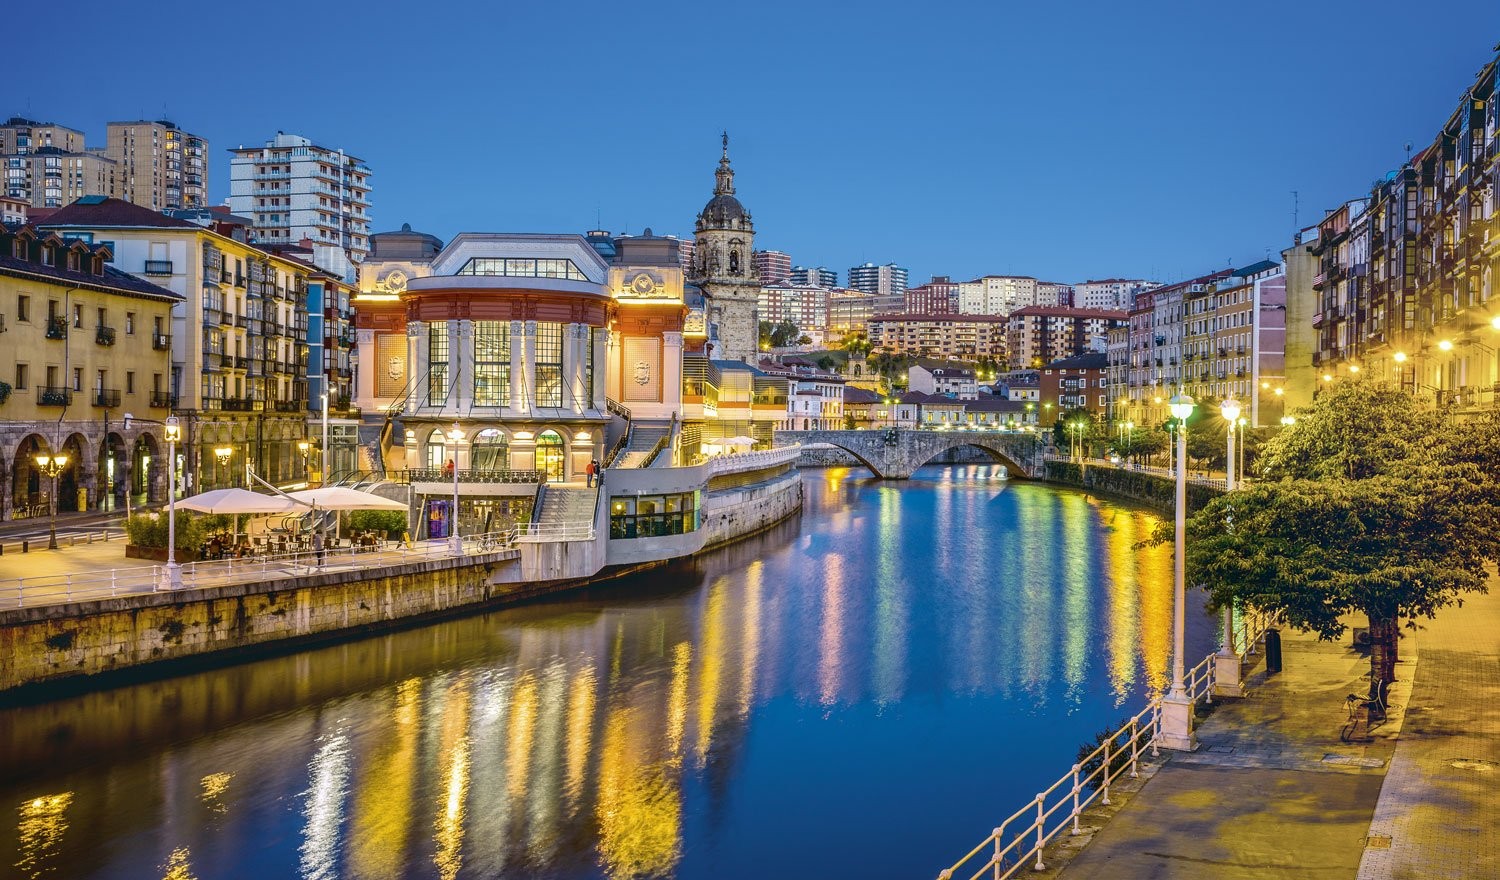 Bilbao photography book, to discover the city